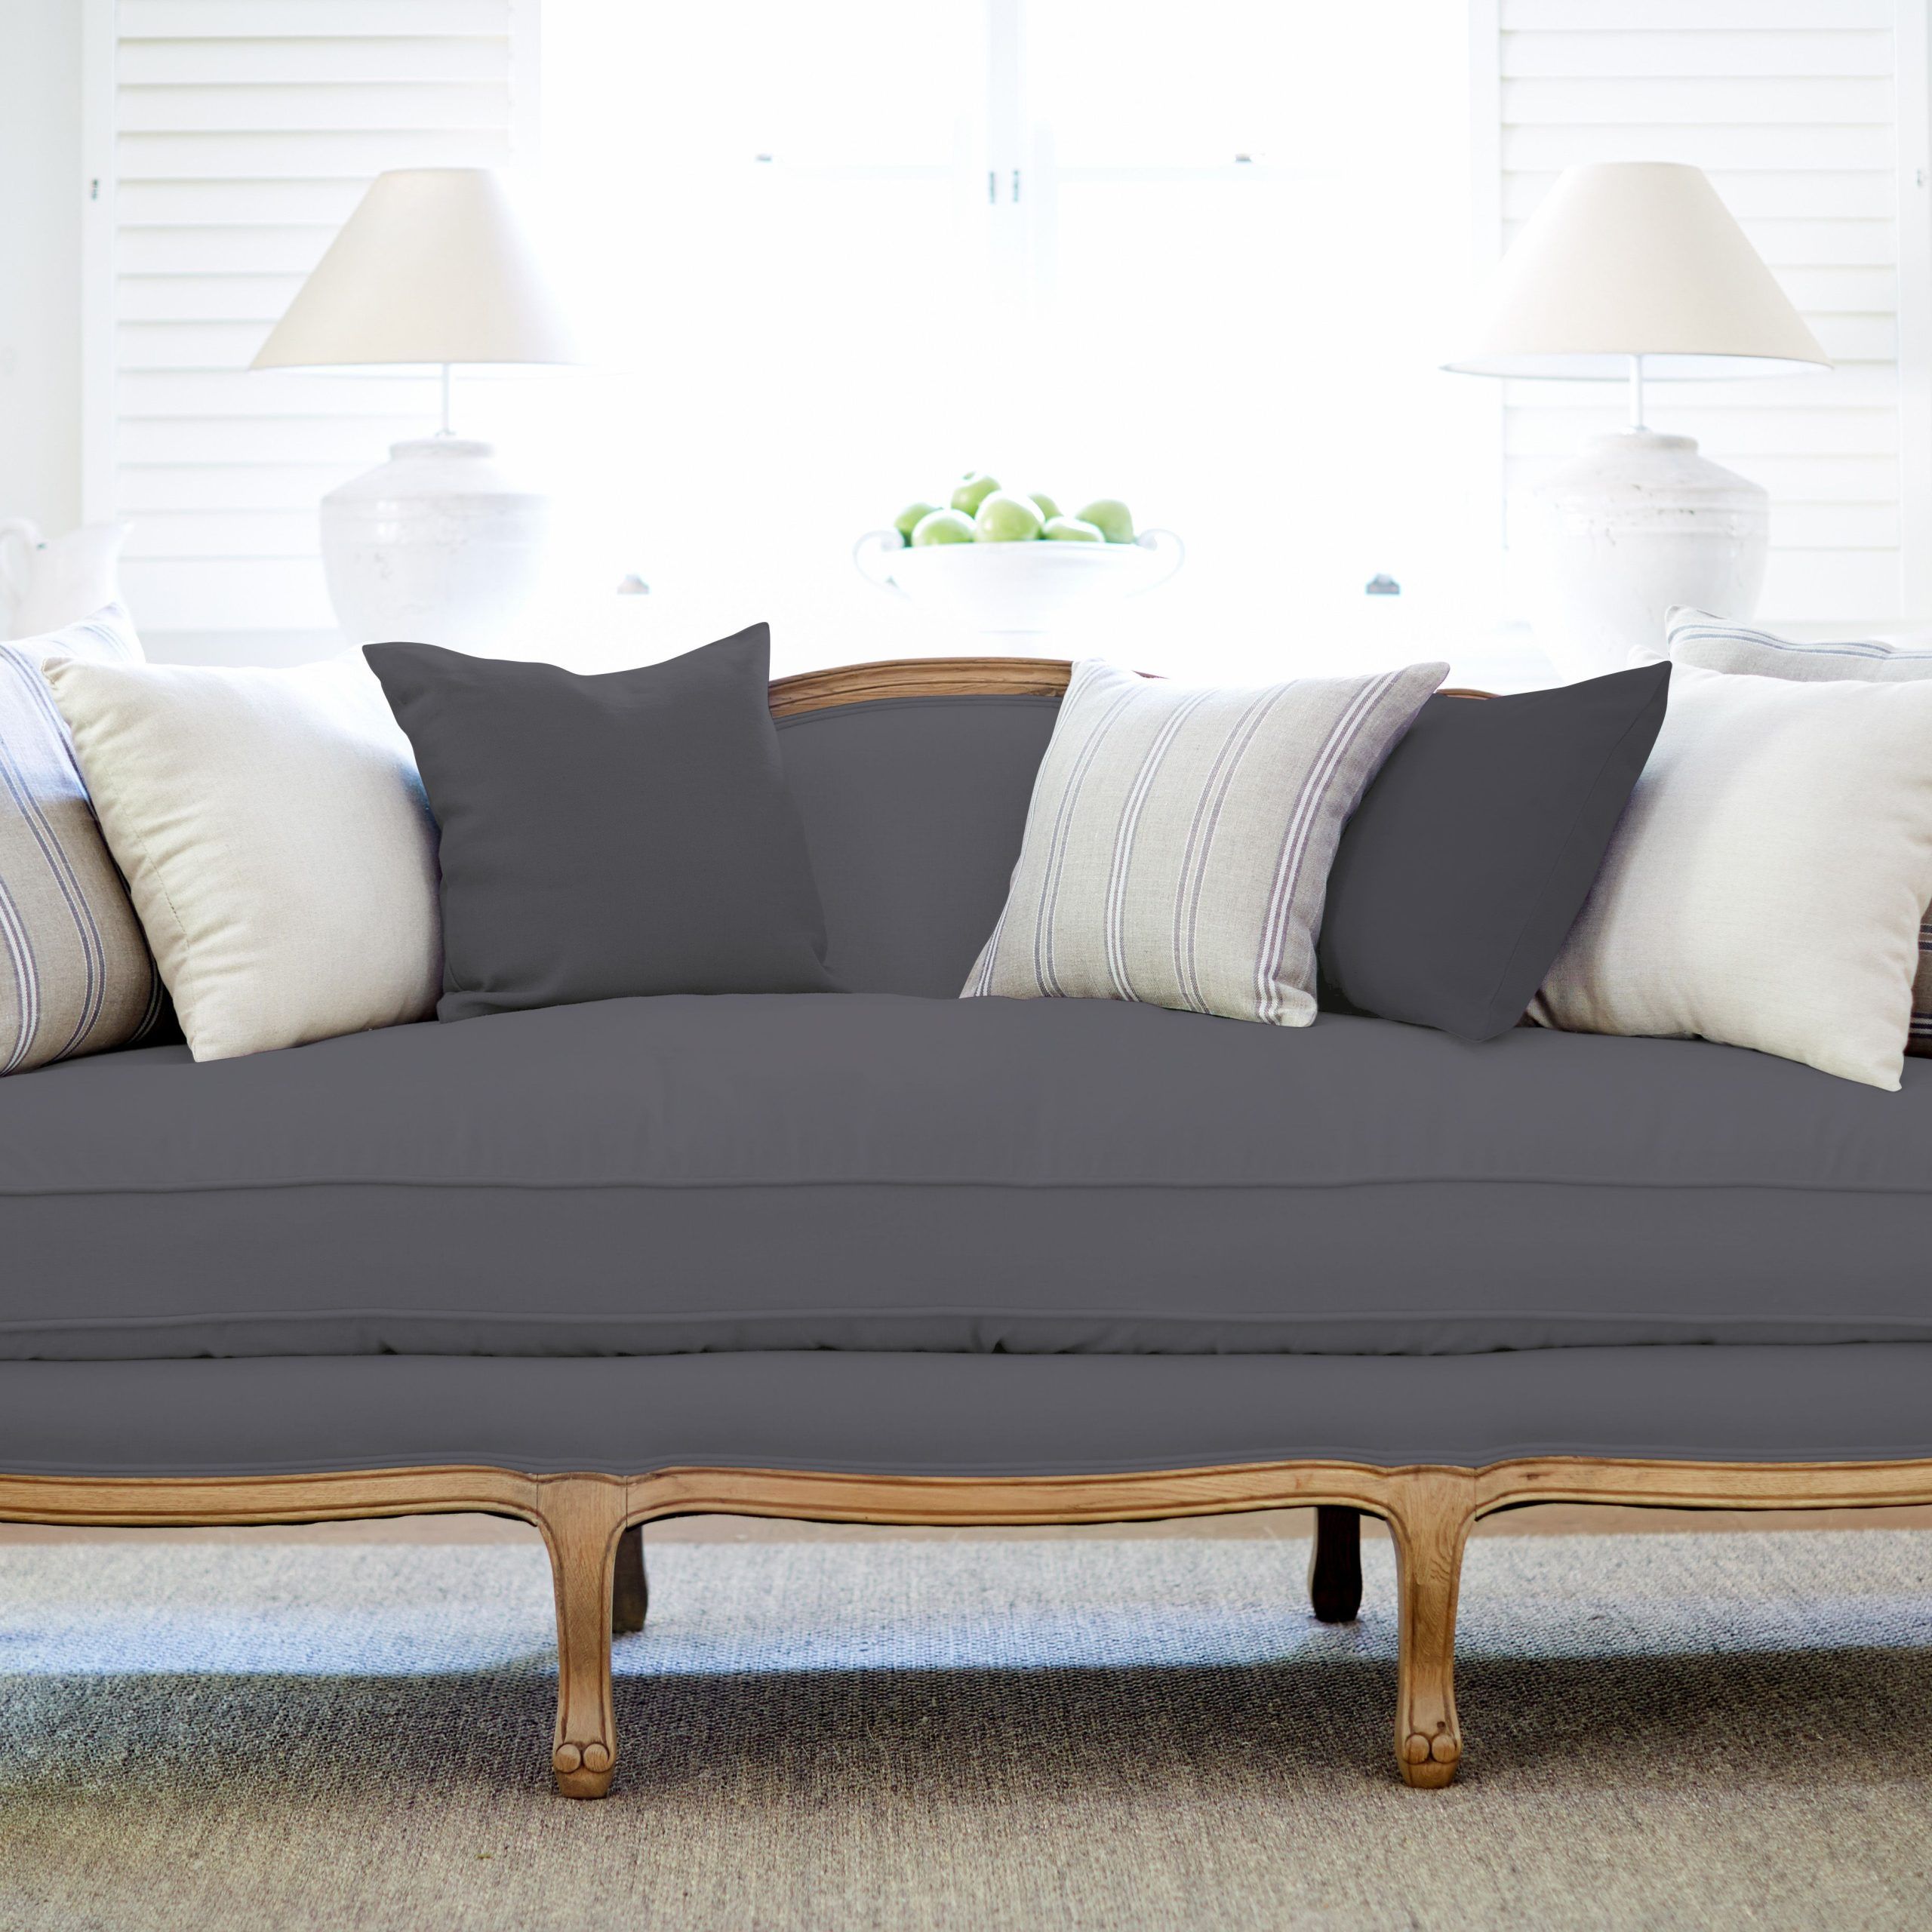 Charcoal Linen Sofa | Sofa Design, Sofa Styling, Sofa Makeover Within Light Charcoal Linen Sofas (View 8 of 20)